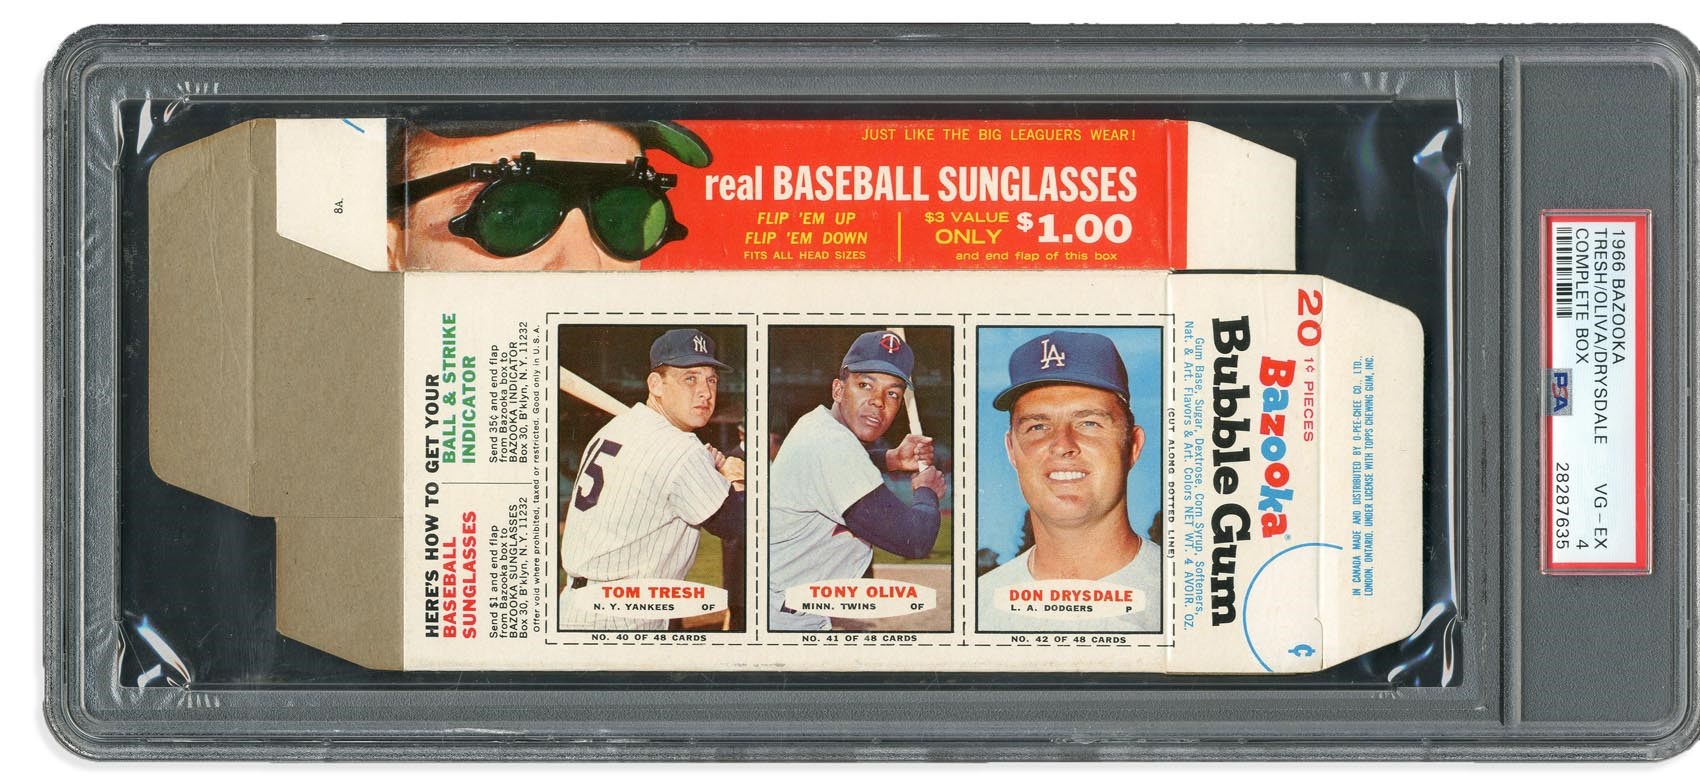 Baseball and Trading Cards - 1966 Bazooka Complete Box with Tresh, Oliva, and Drysdale PSA VG-EX 4